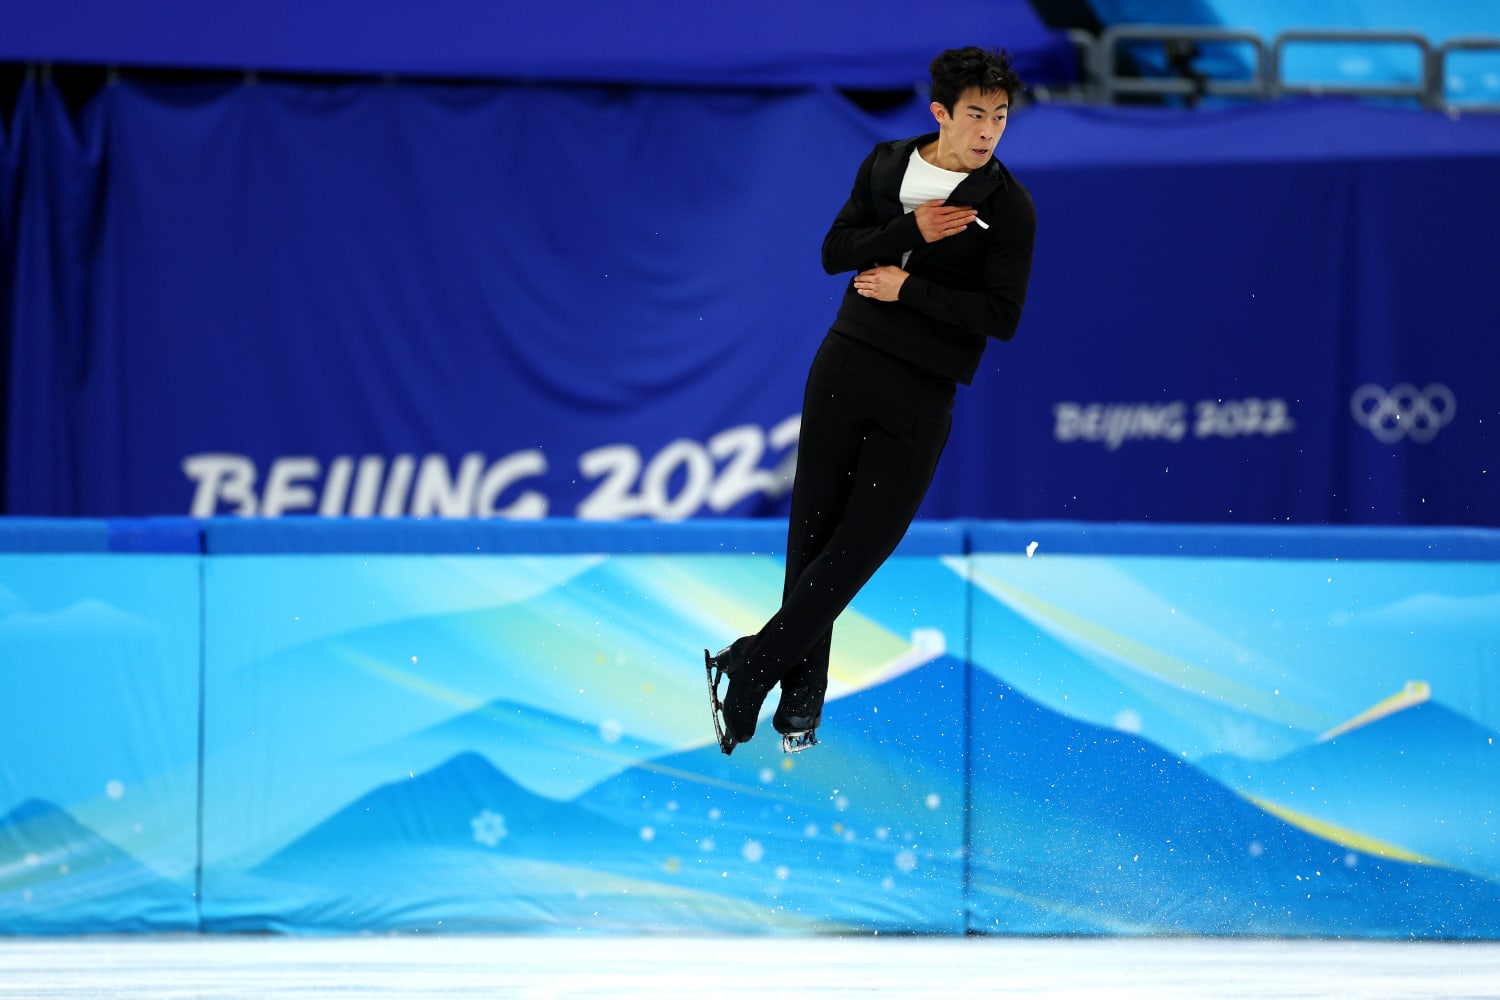 Nathan Chen records second-highest short program score ever as U.S